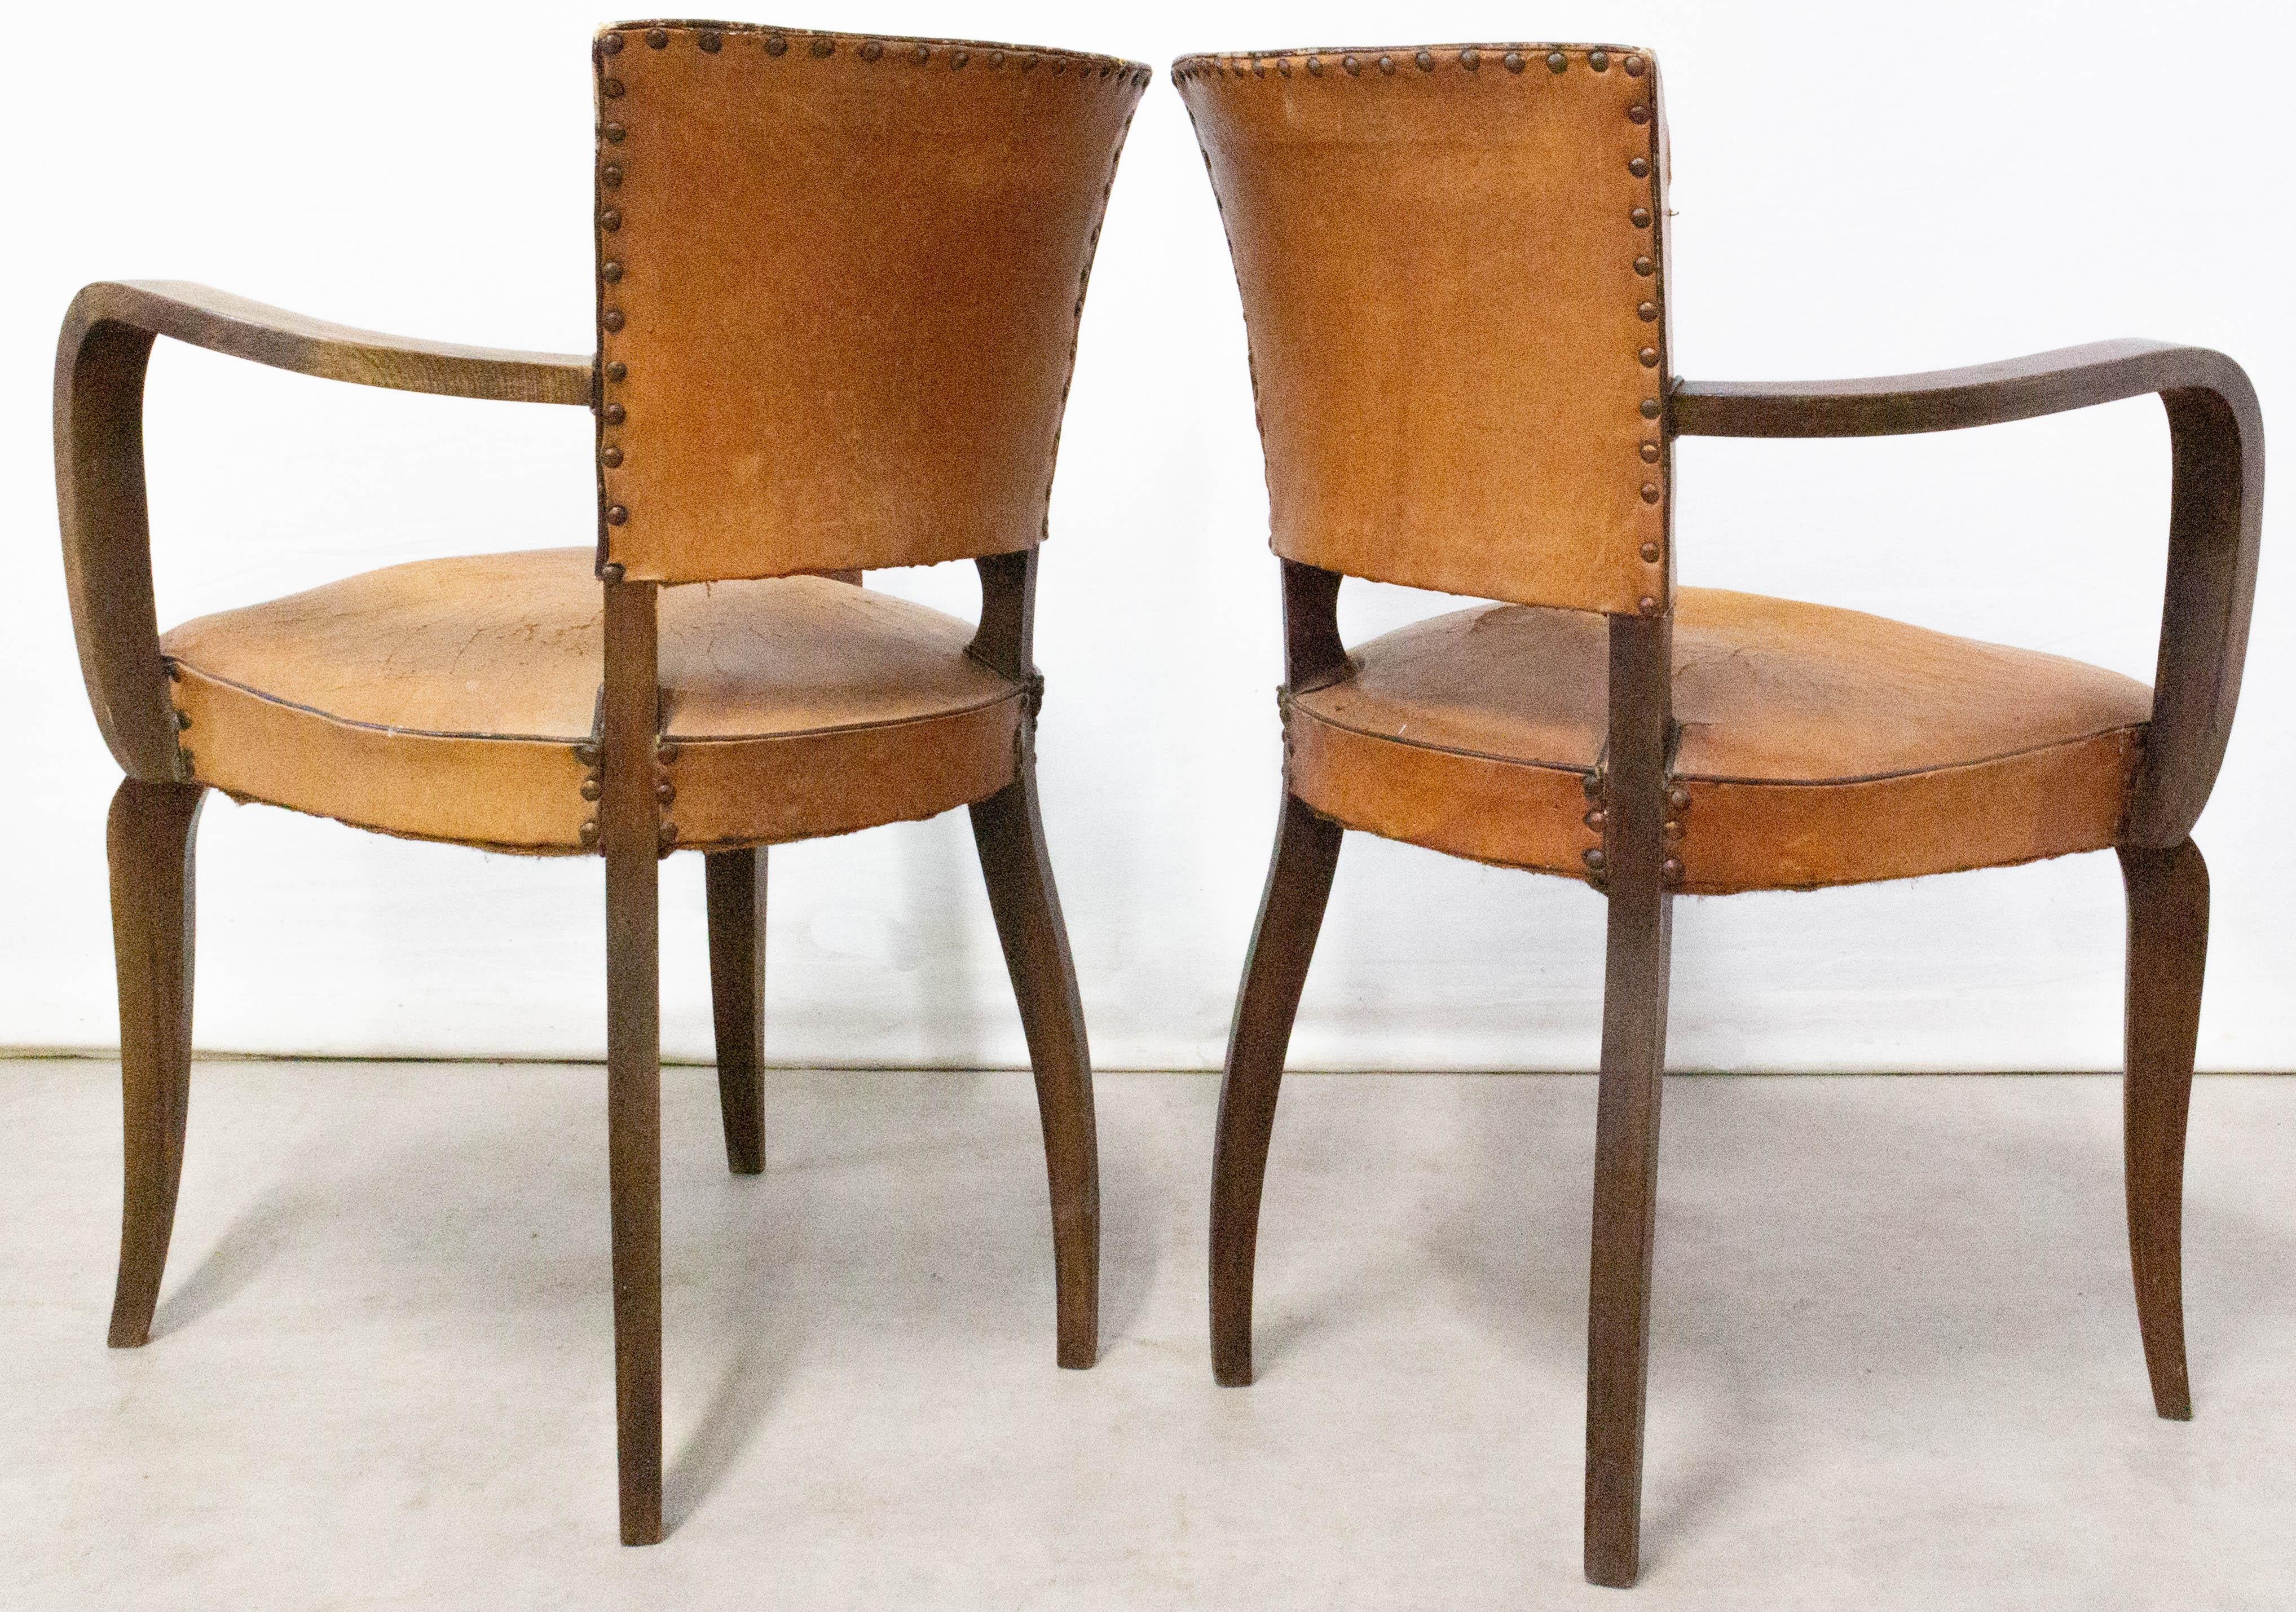 Pair of Bridge Chairs Leather French Art Deco circa 1930, to be Re-Upholstered 2